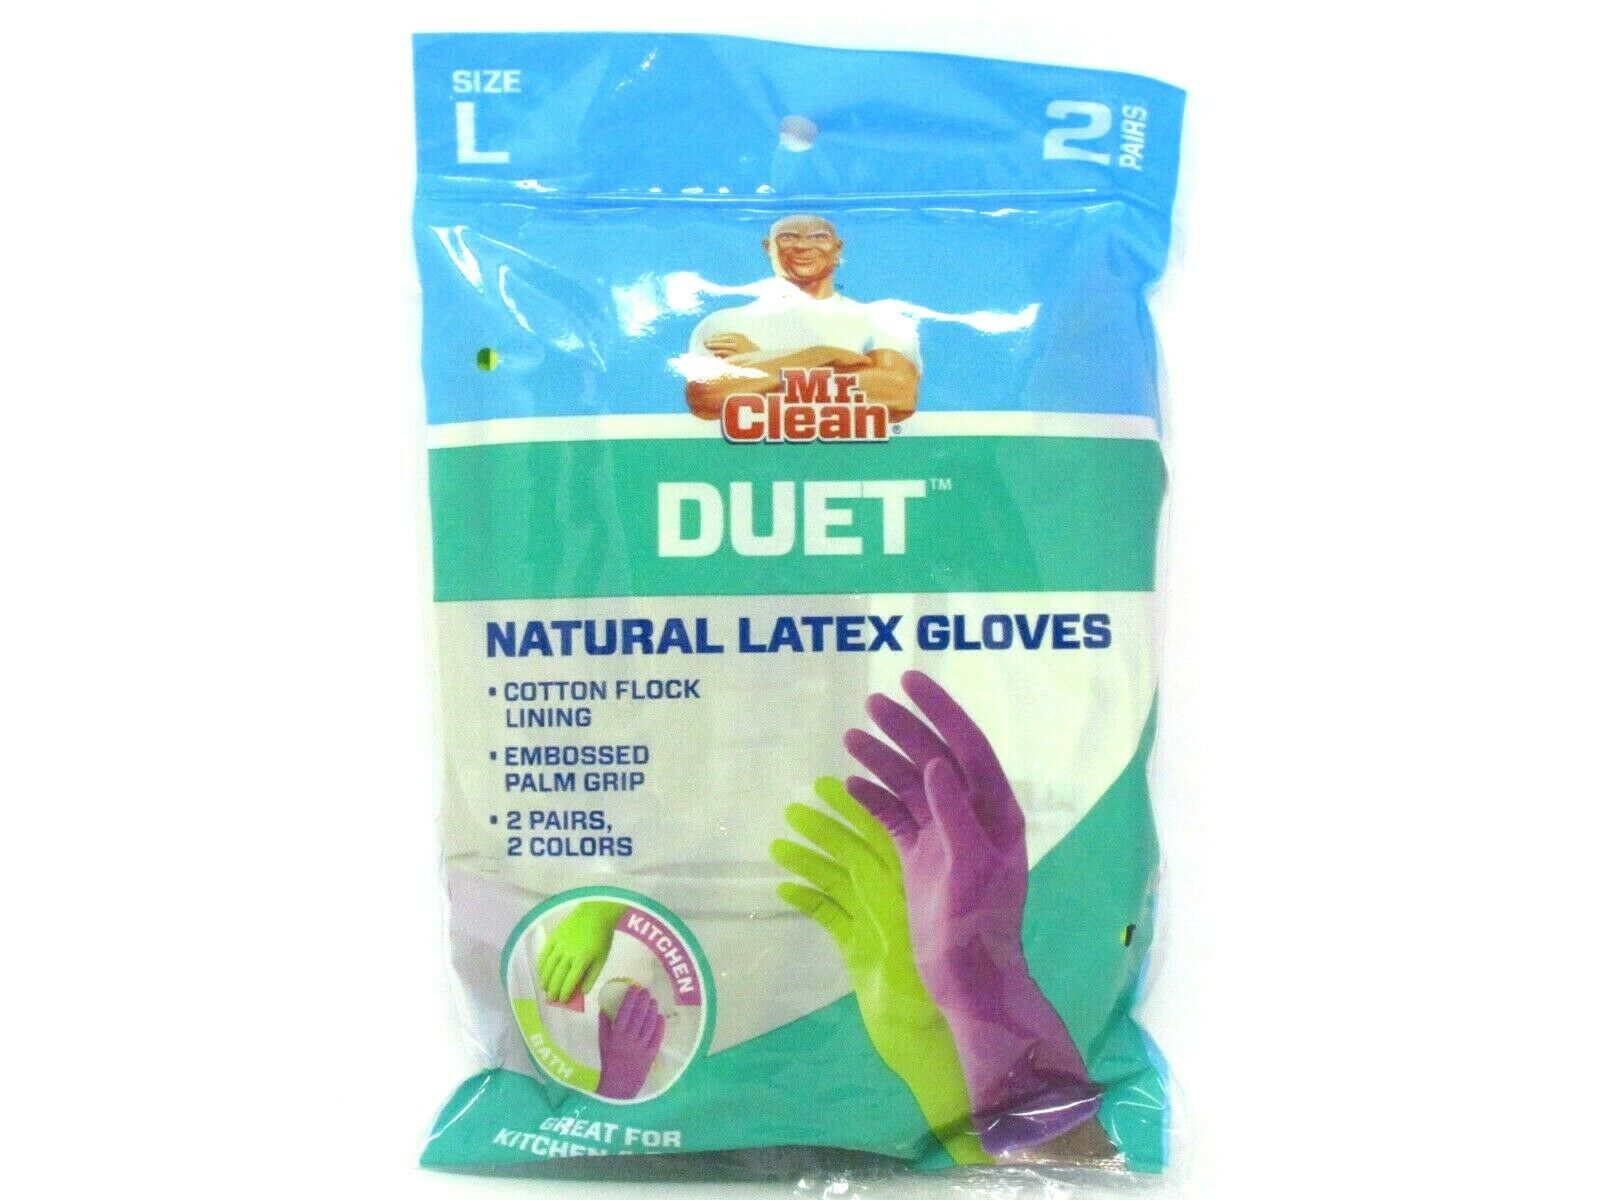 Mr Clean Duet Natural Latex Gloves Beaded Cuff Cotton Flock Lining 2 Pairs Large